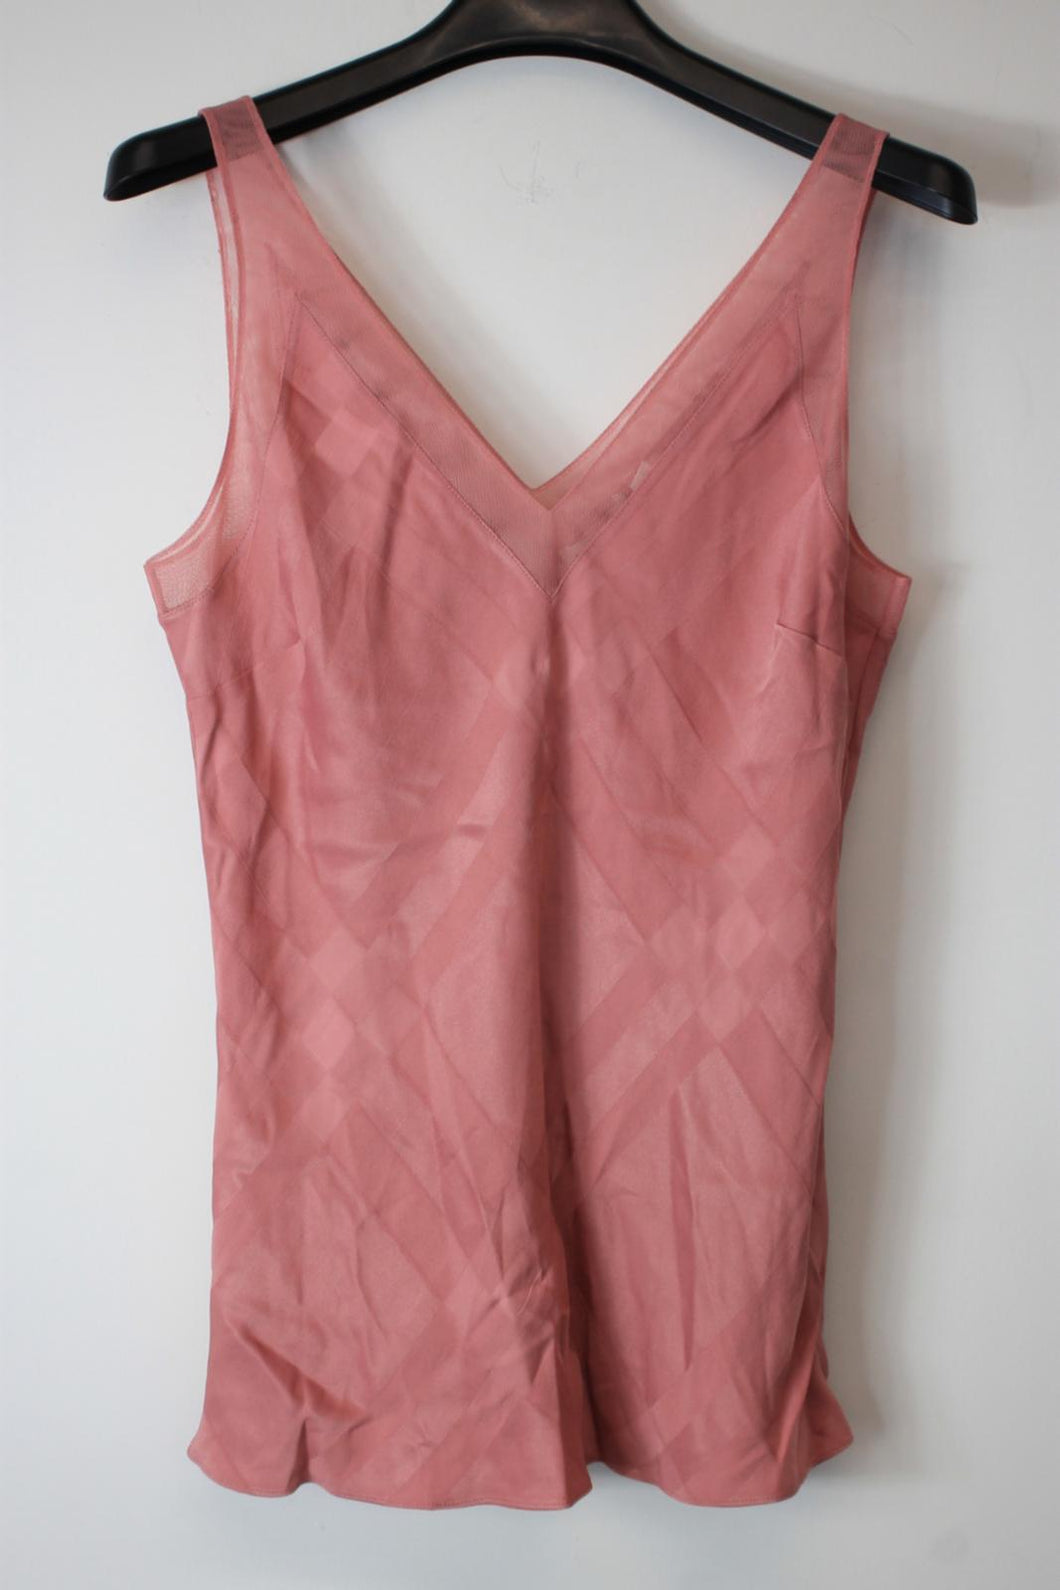 TED BAKER Ladies Coral Pink V-Neck Check Detail Camisole Vest Top Size M BNWT